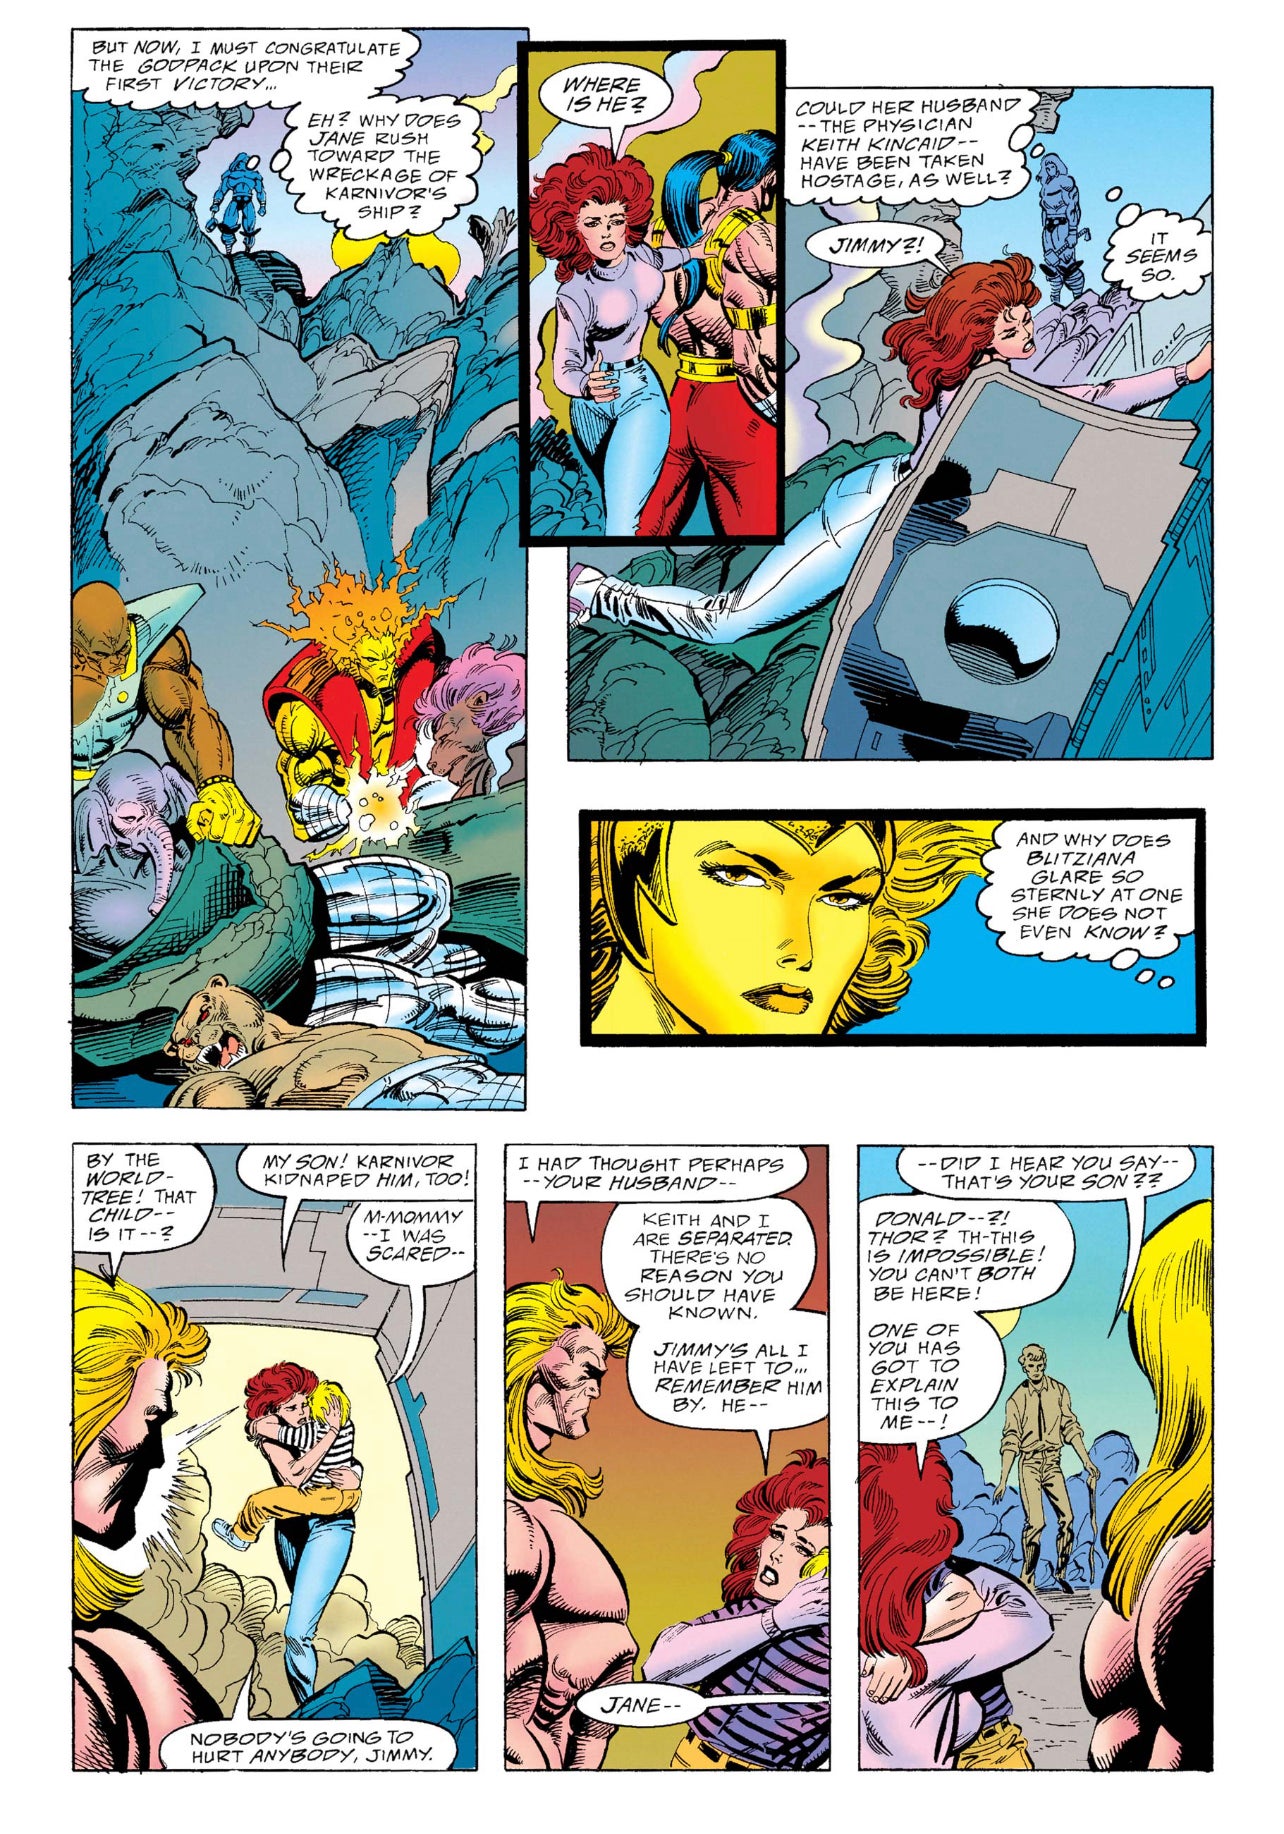 Interior page showing Jimmy meeting Thor